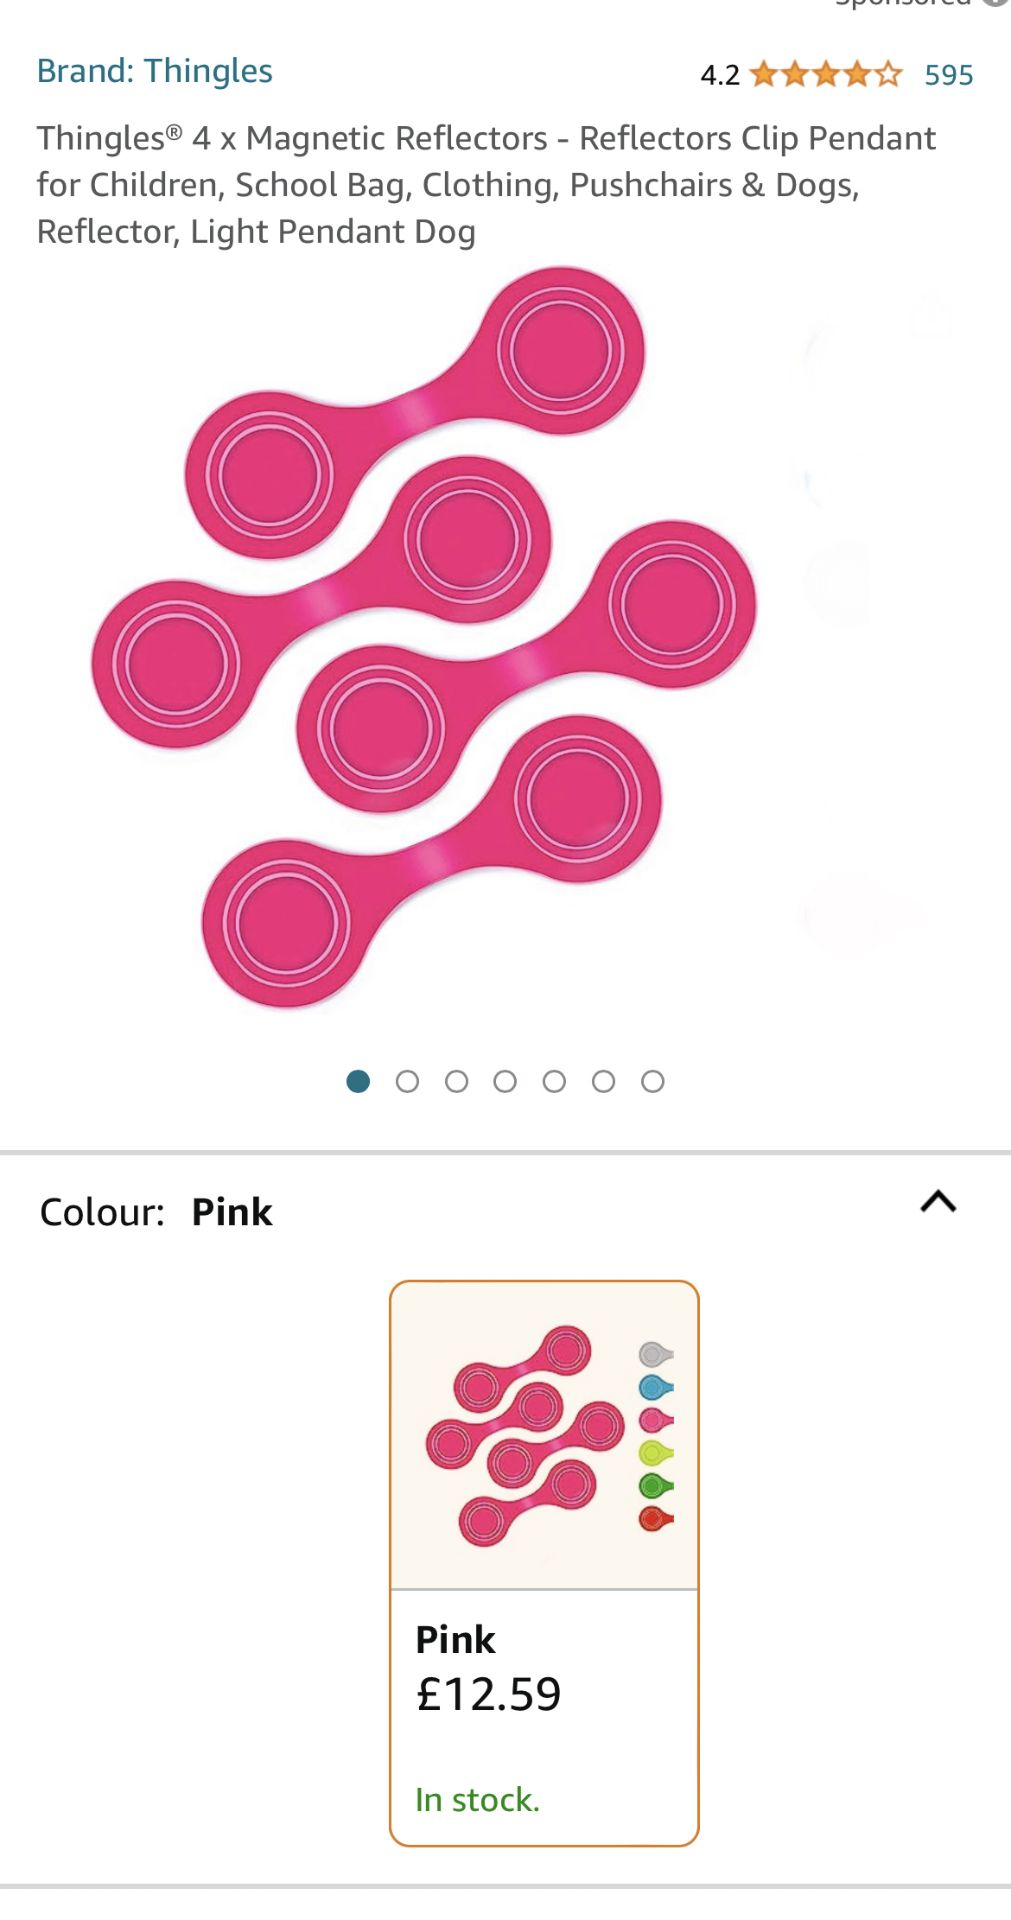 100 x Thingles Pink 4 Pack of Magnetic Reflectors for Children, School Bag, Bike etc - RRP £799! - Image 2 of 9